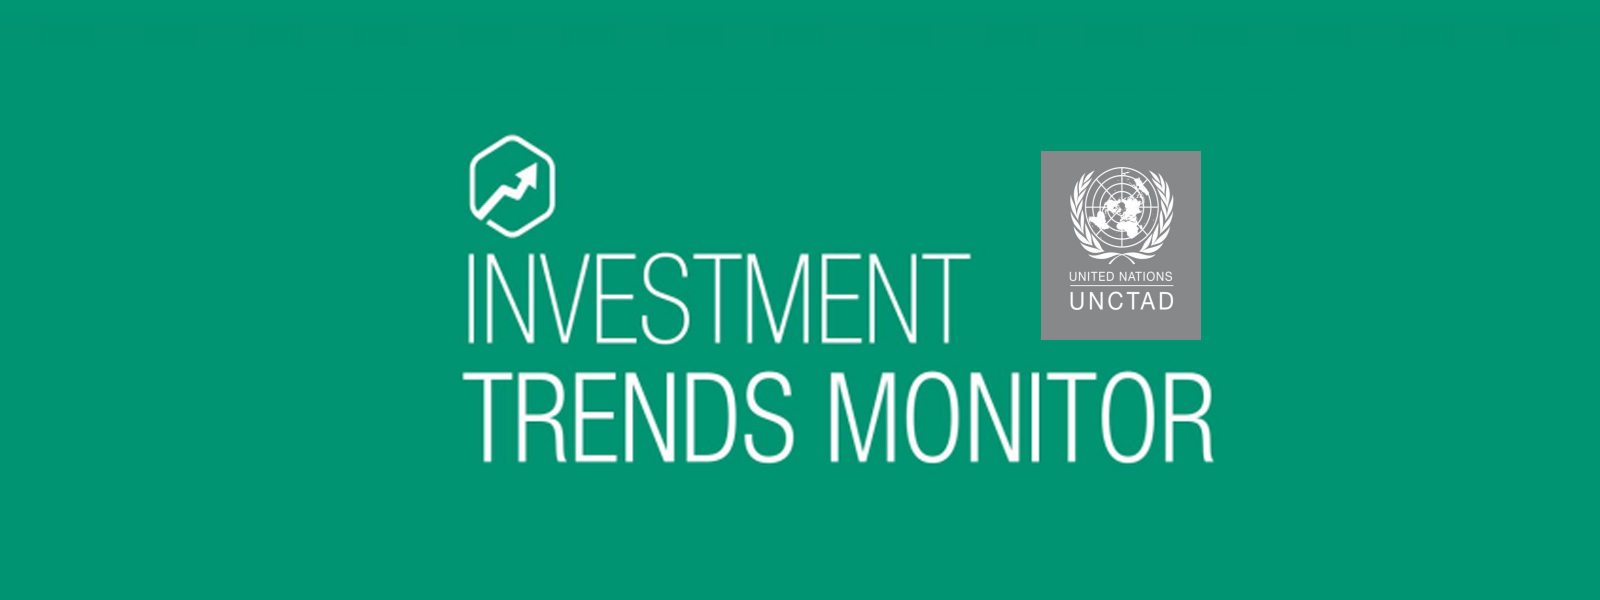 UNCTAD investment trend monitor